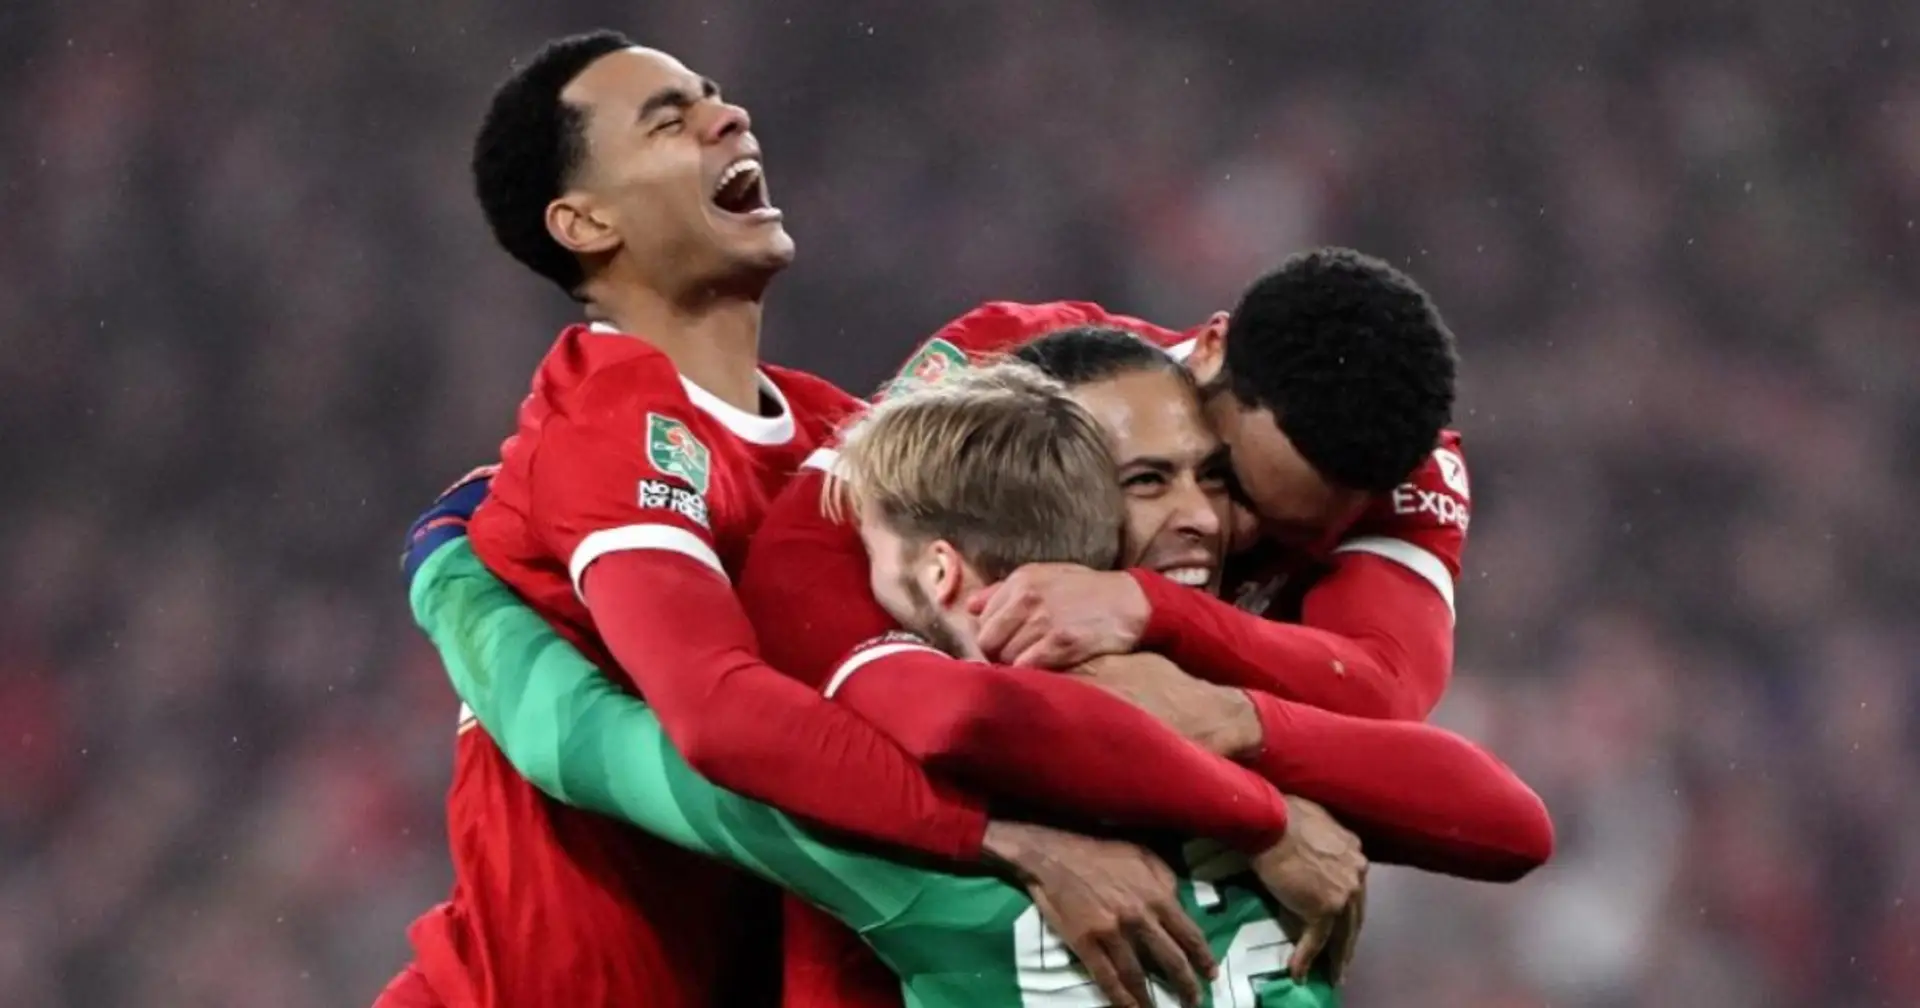 Liverpool win Carabao Cup final & 2 more big stories at Liverpool you might've missed